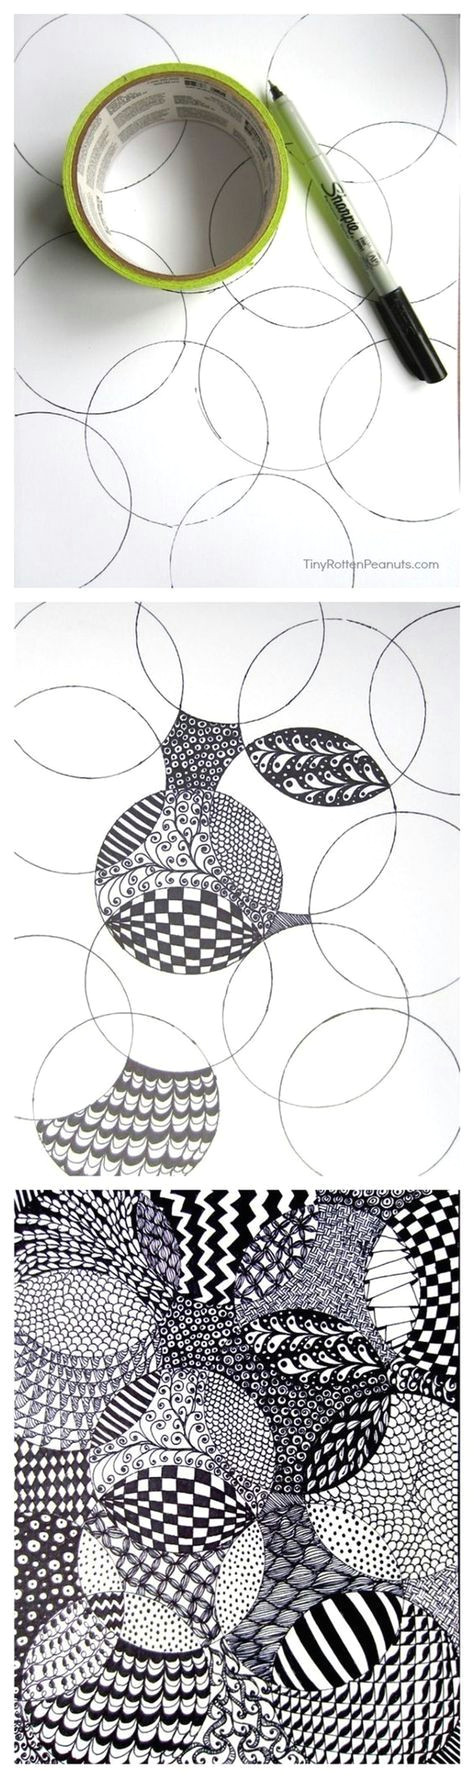 40 Easy Drawings 40 Simple and Easy Doodle Art Ideas to Try Zentangle Drawings